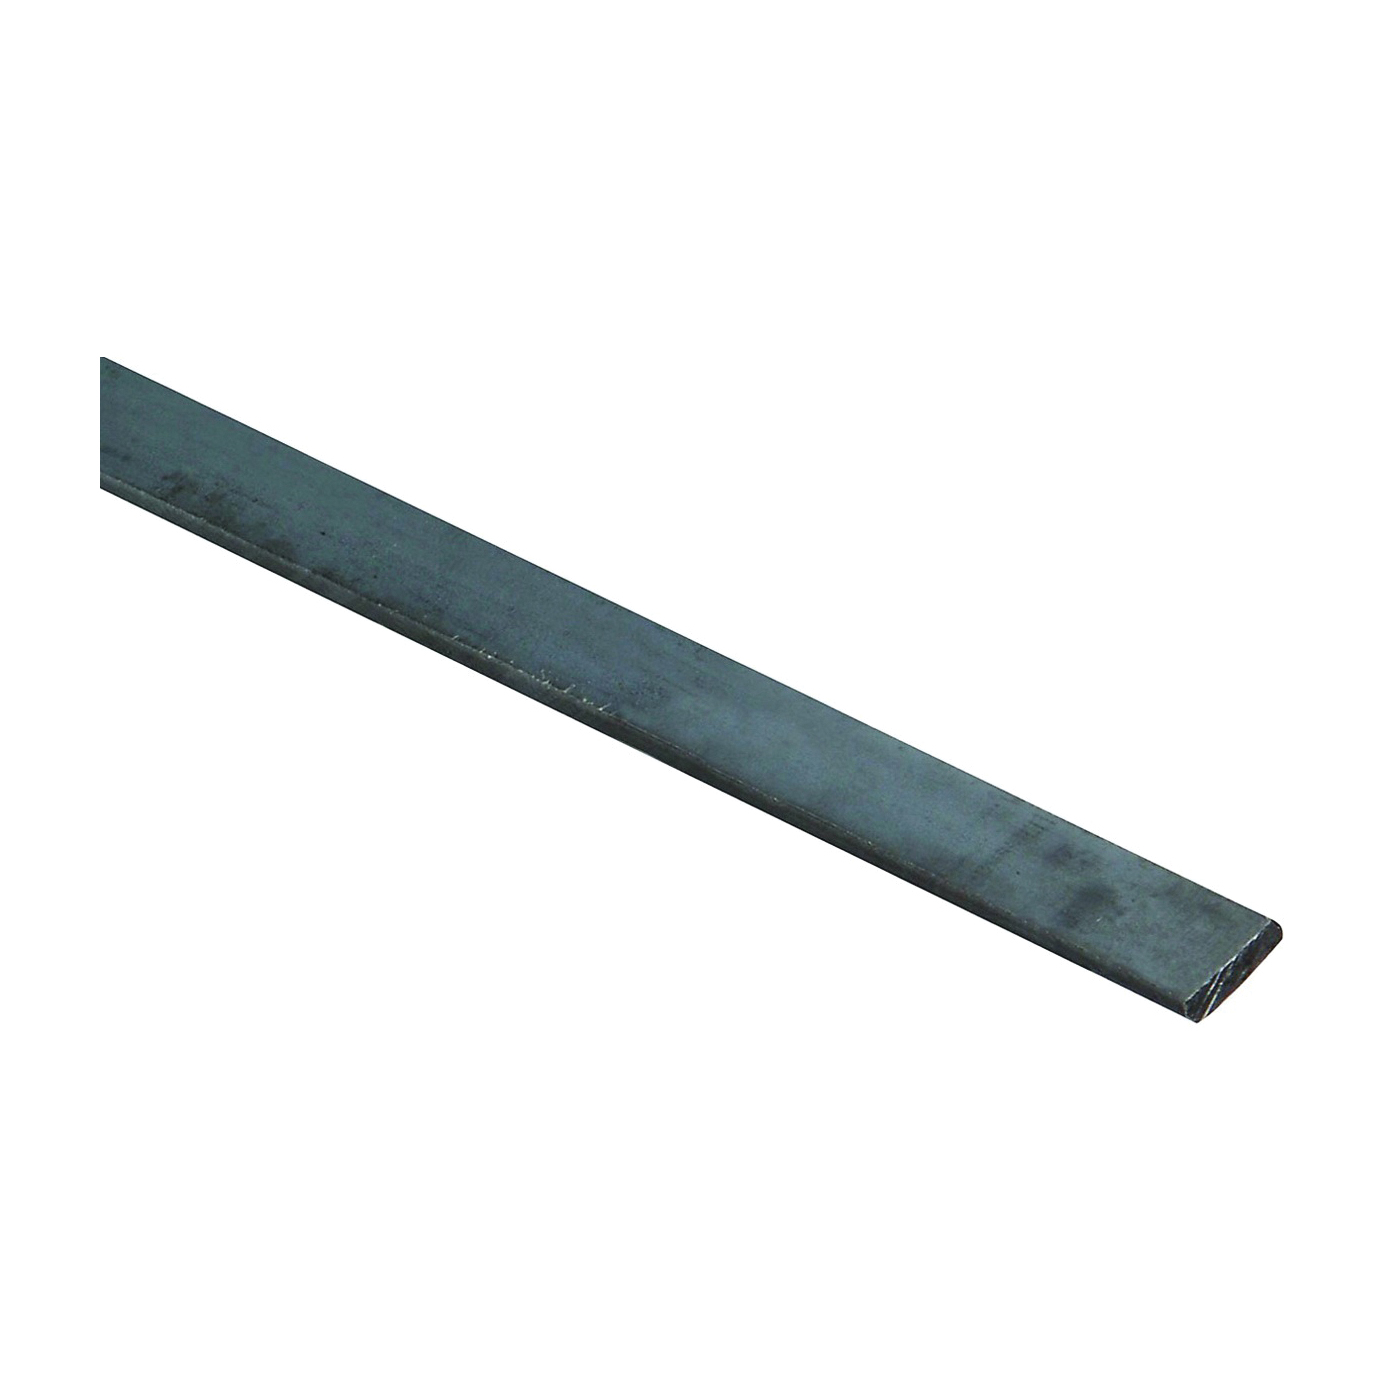 4062BC Series N215-590 Flat Stock, 1-1/2 in W, 72 in L, 1/8 in Thick, Steel, Mill